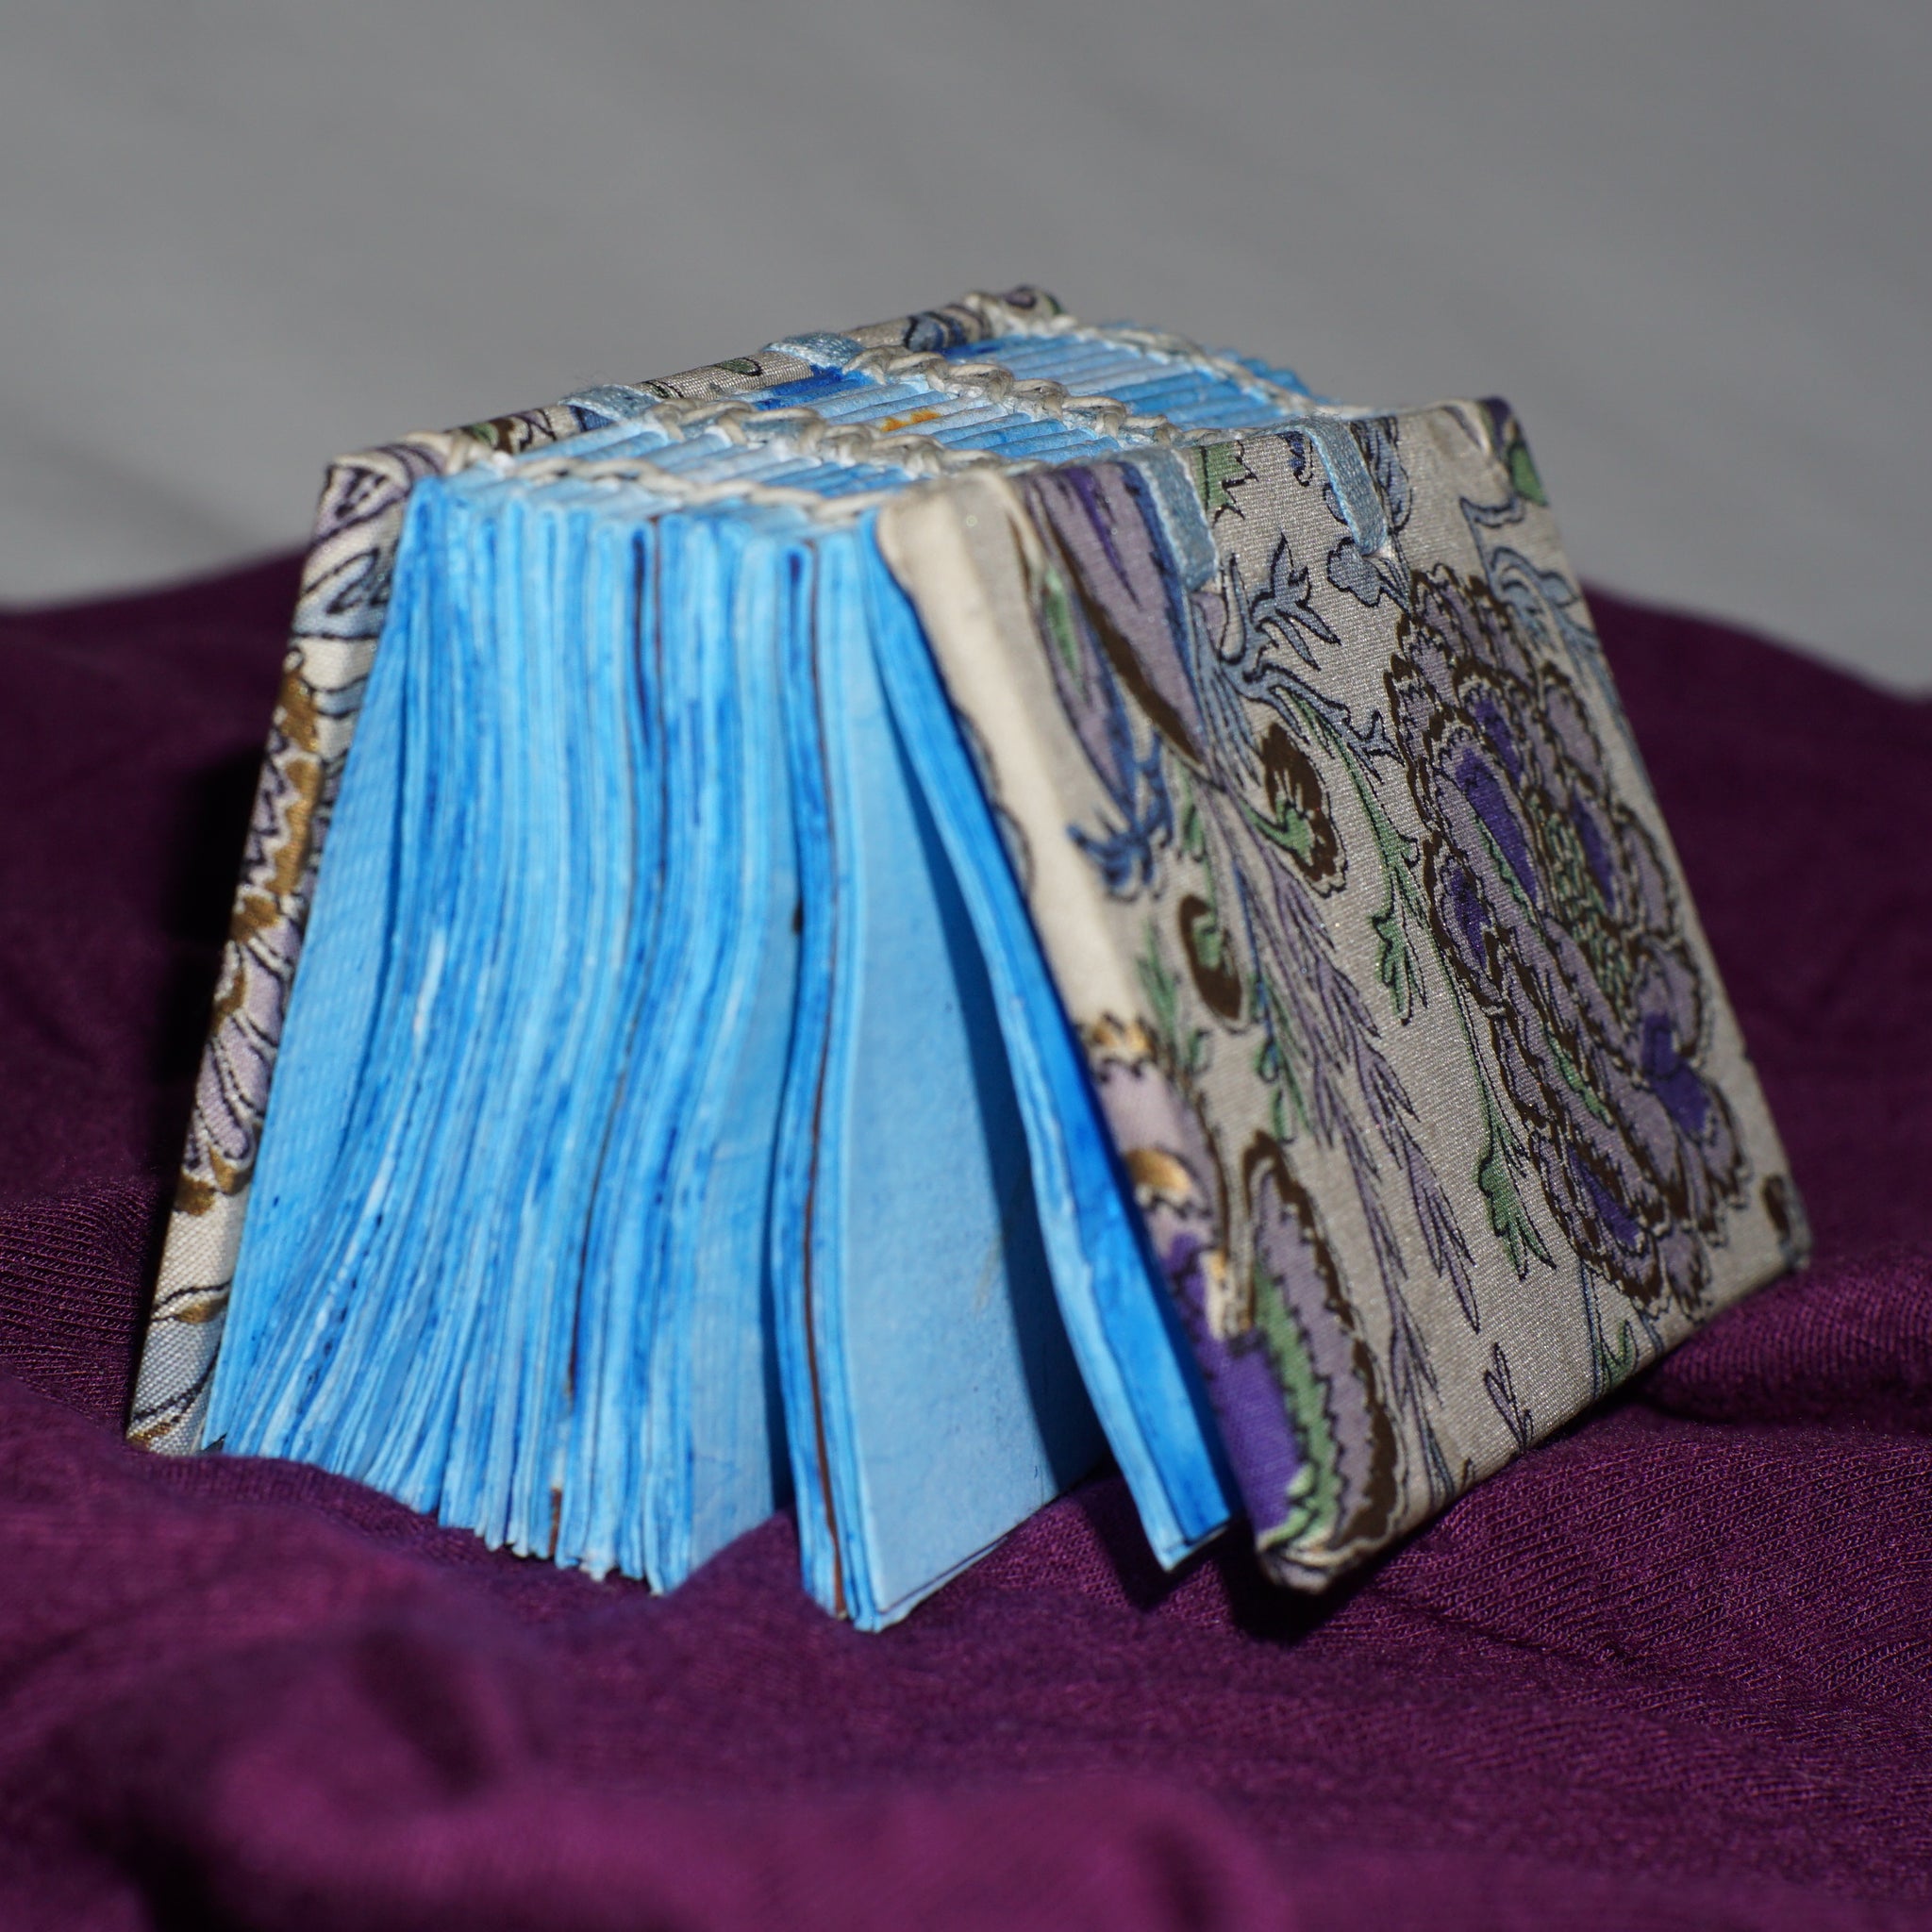 Blank Artist Book, blue with flower cloth cover by Charlene Matthews